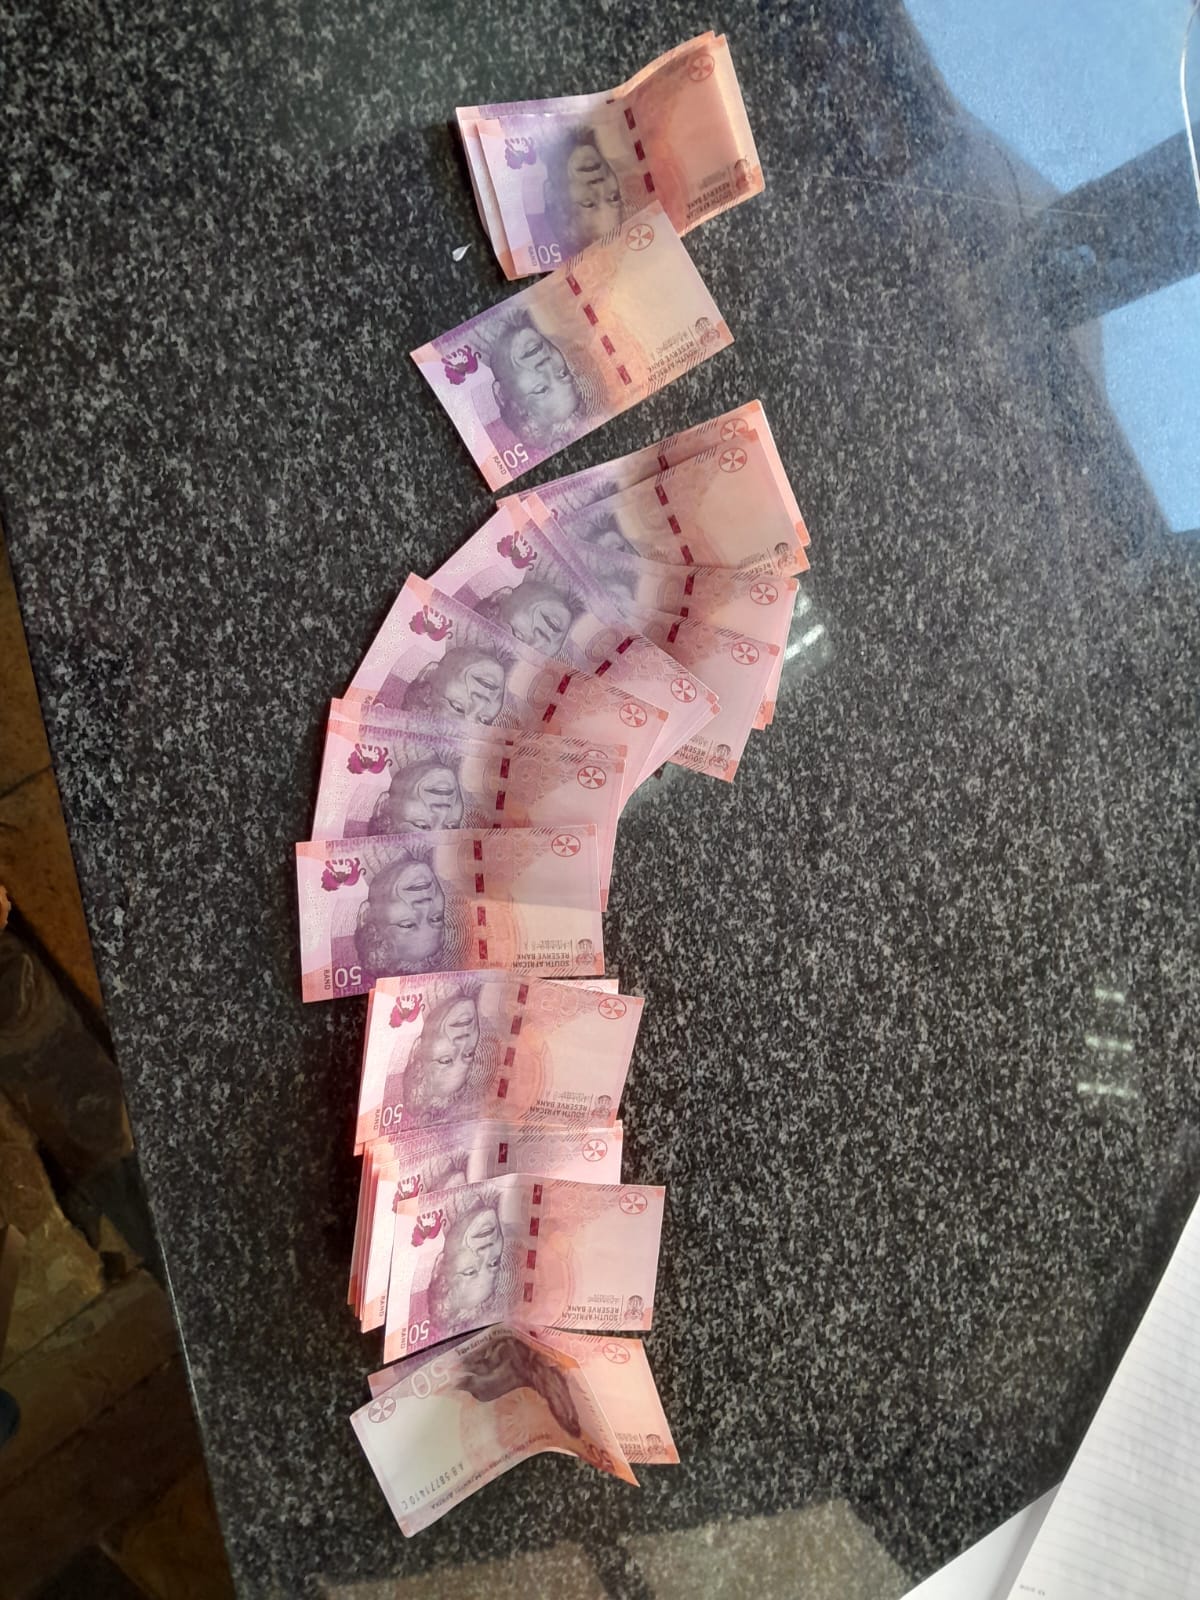 Suspect nabbed in possession of counterfeit money in Hillbrow